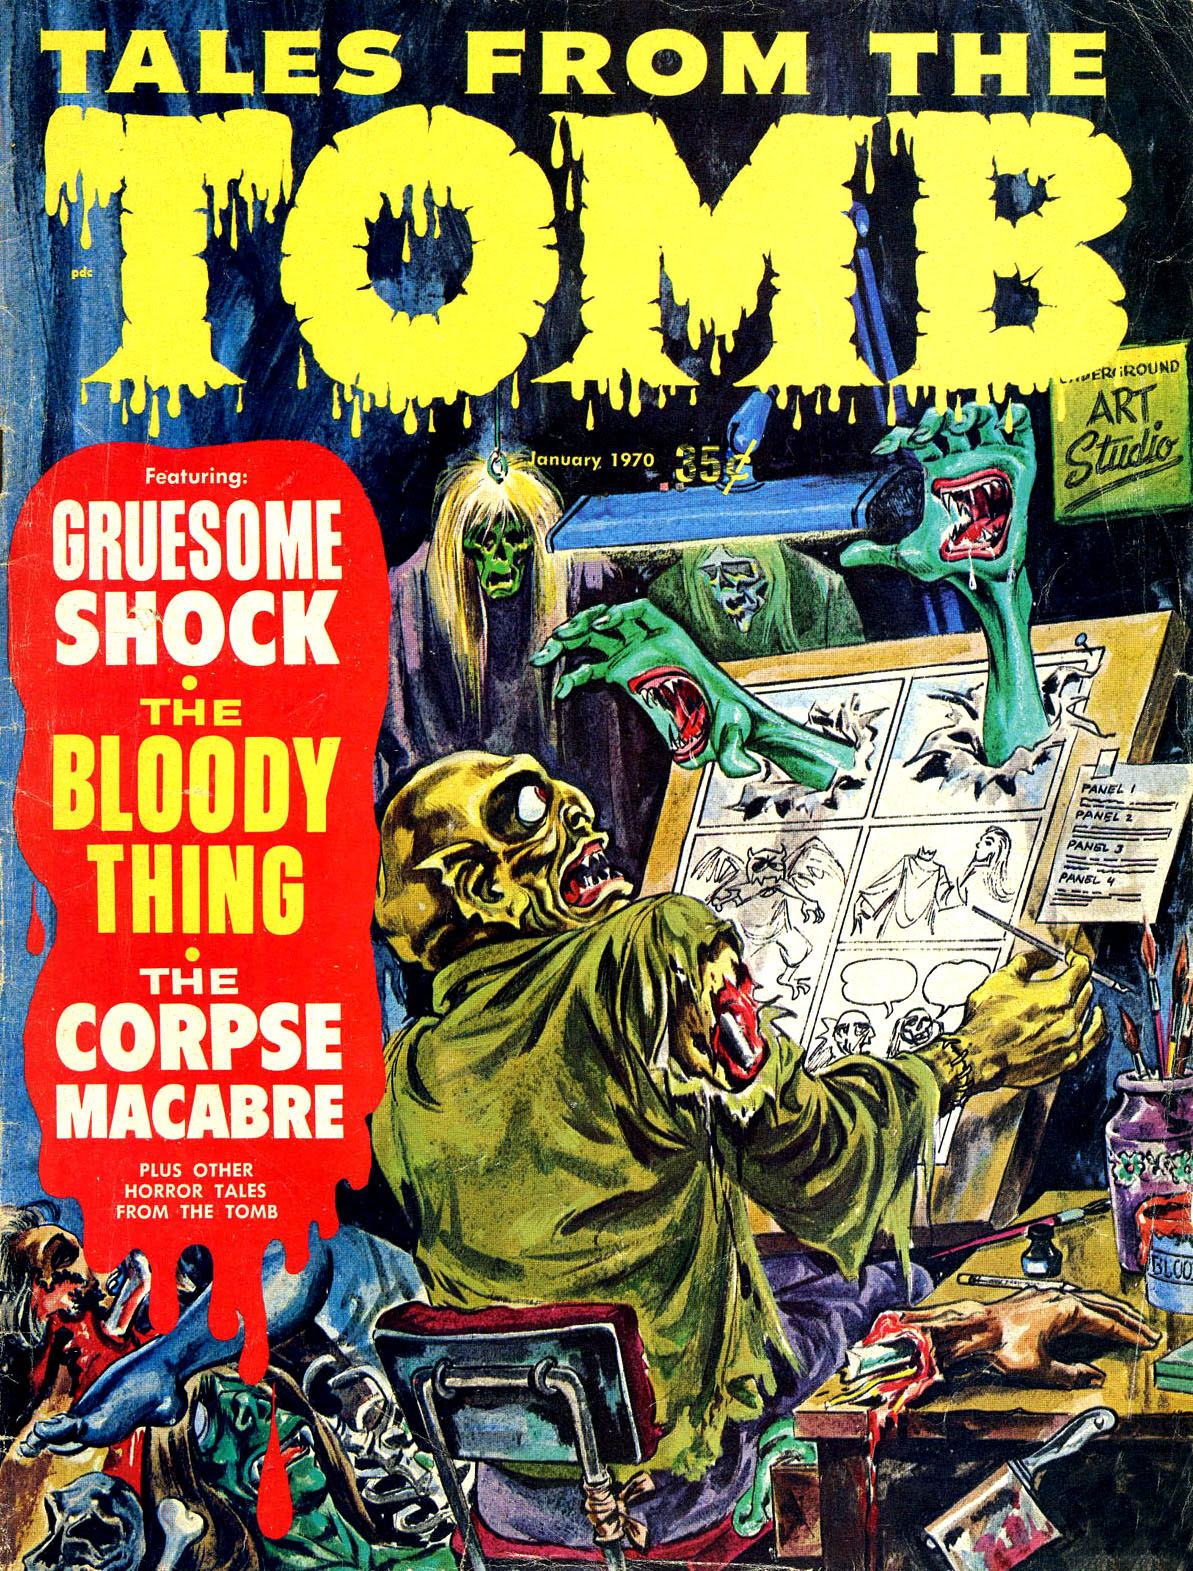 Tales from the Tomb - Vol. 2 #1 (Eerie Publications, 1970) 